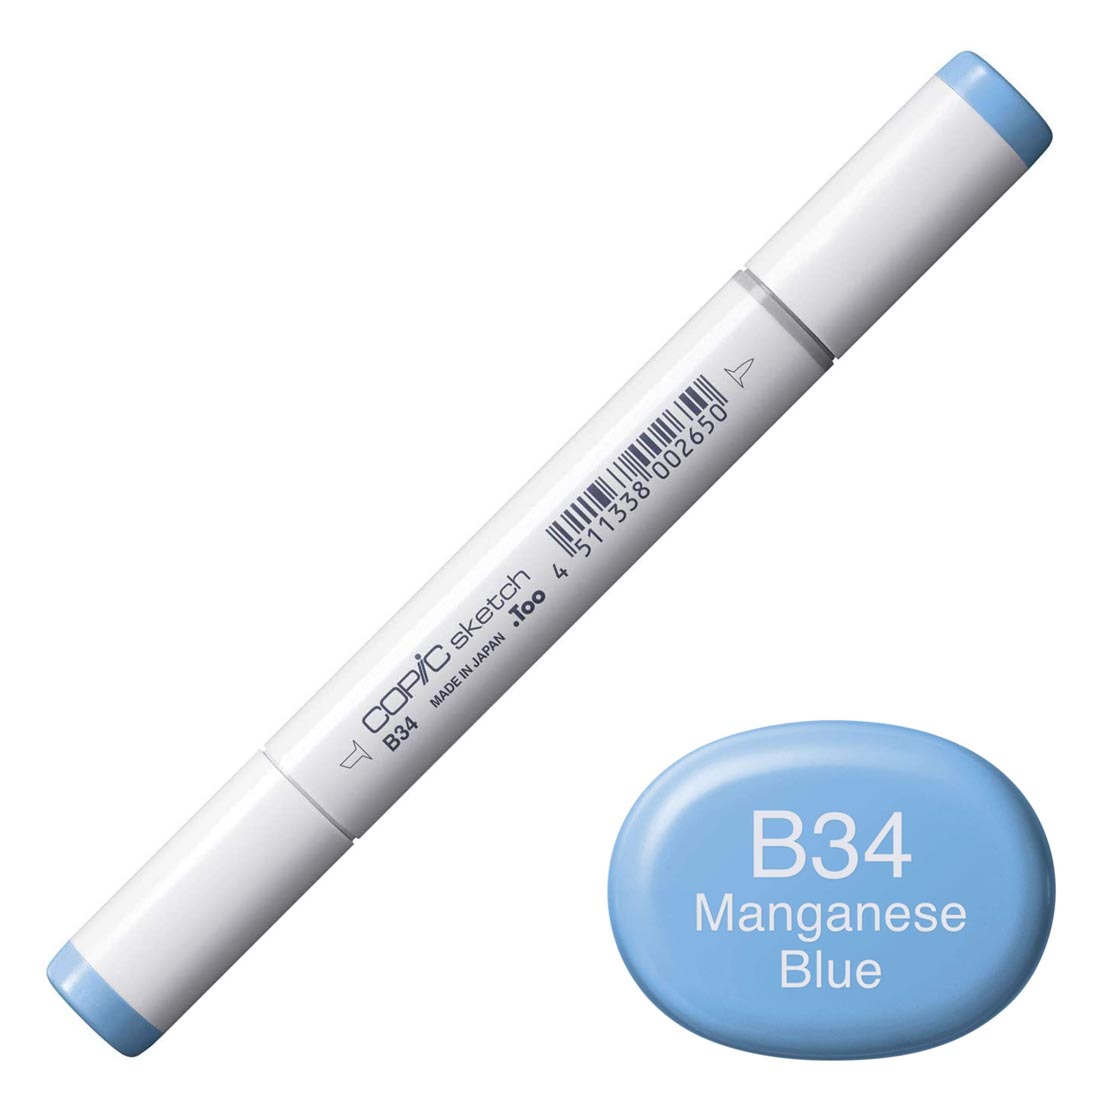 COPIC Sketch Marker with a color swatch and text of B34 Manganese Blue